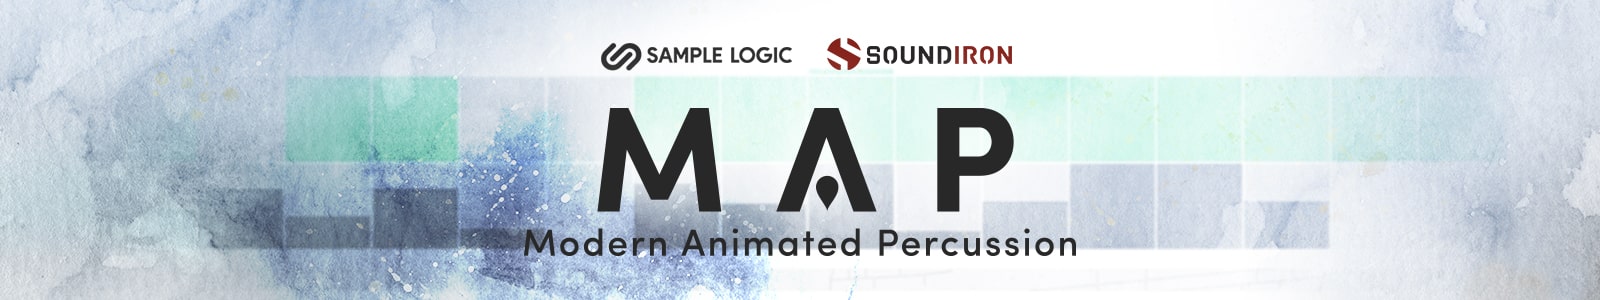 modern animated percussion by sample logic